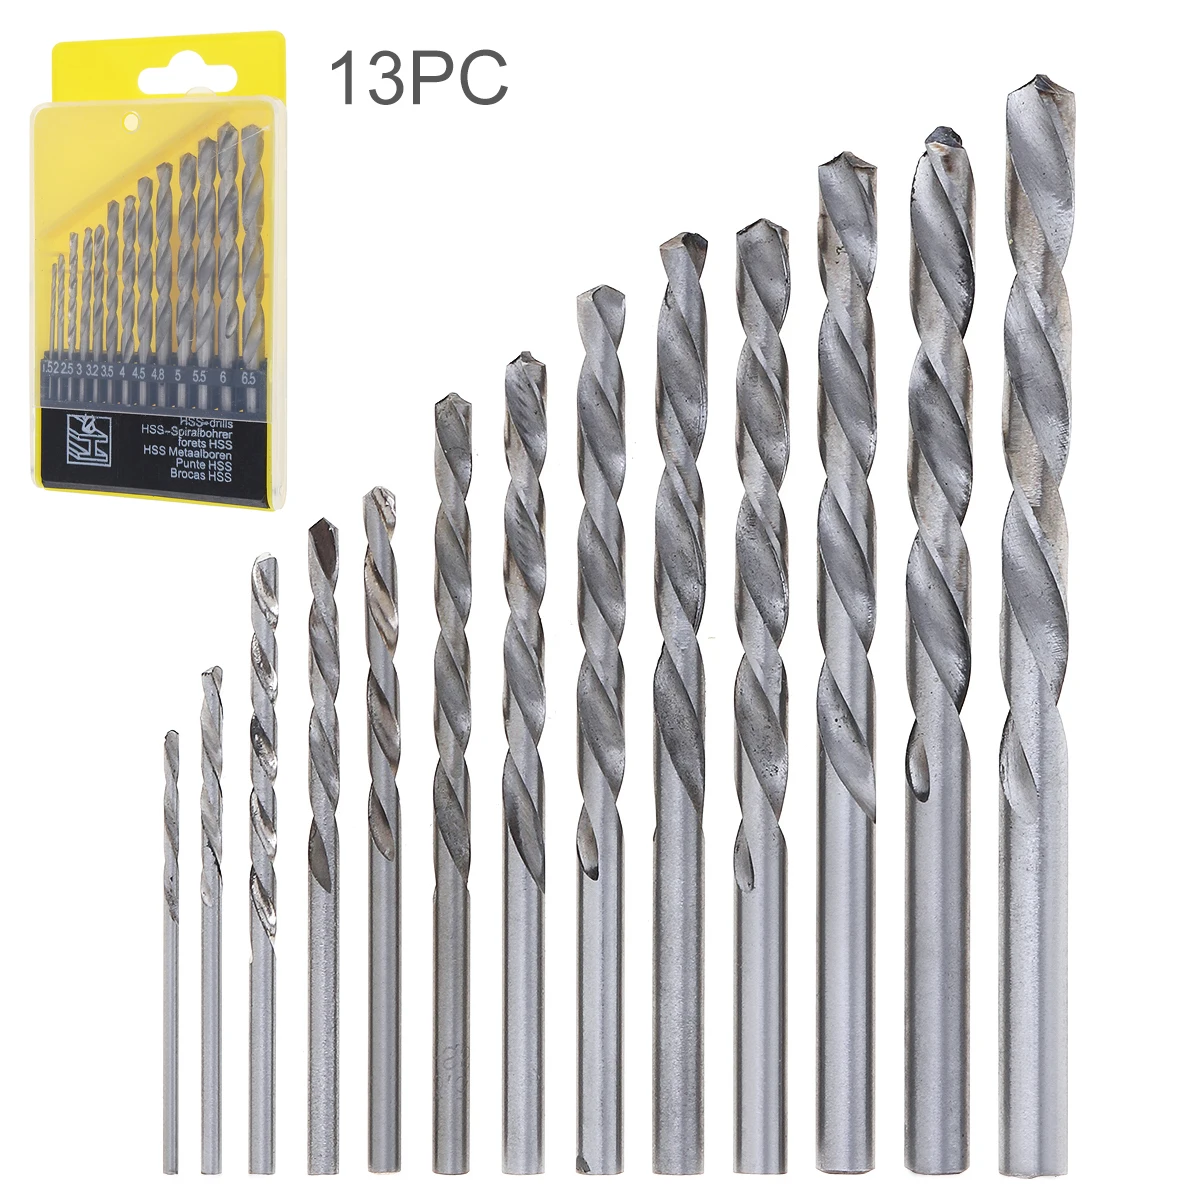 

13pcs HHS 4241 Twist Drill Bits Hole Foret HSS Spiralbohrer Metaalboren with Straight Shank for Drilling Aluminum Plastic Wood